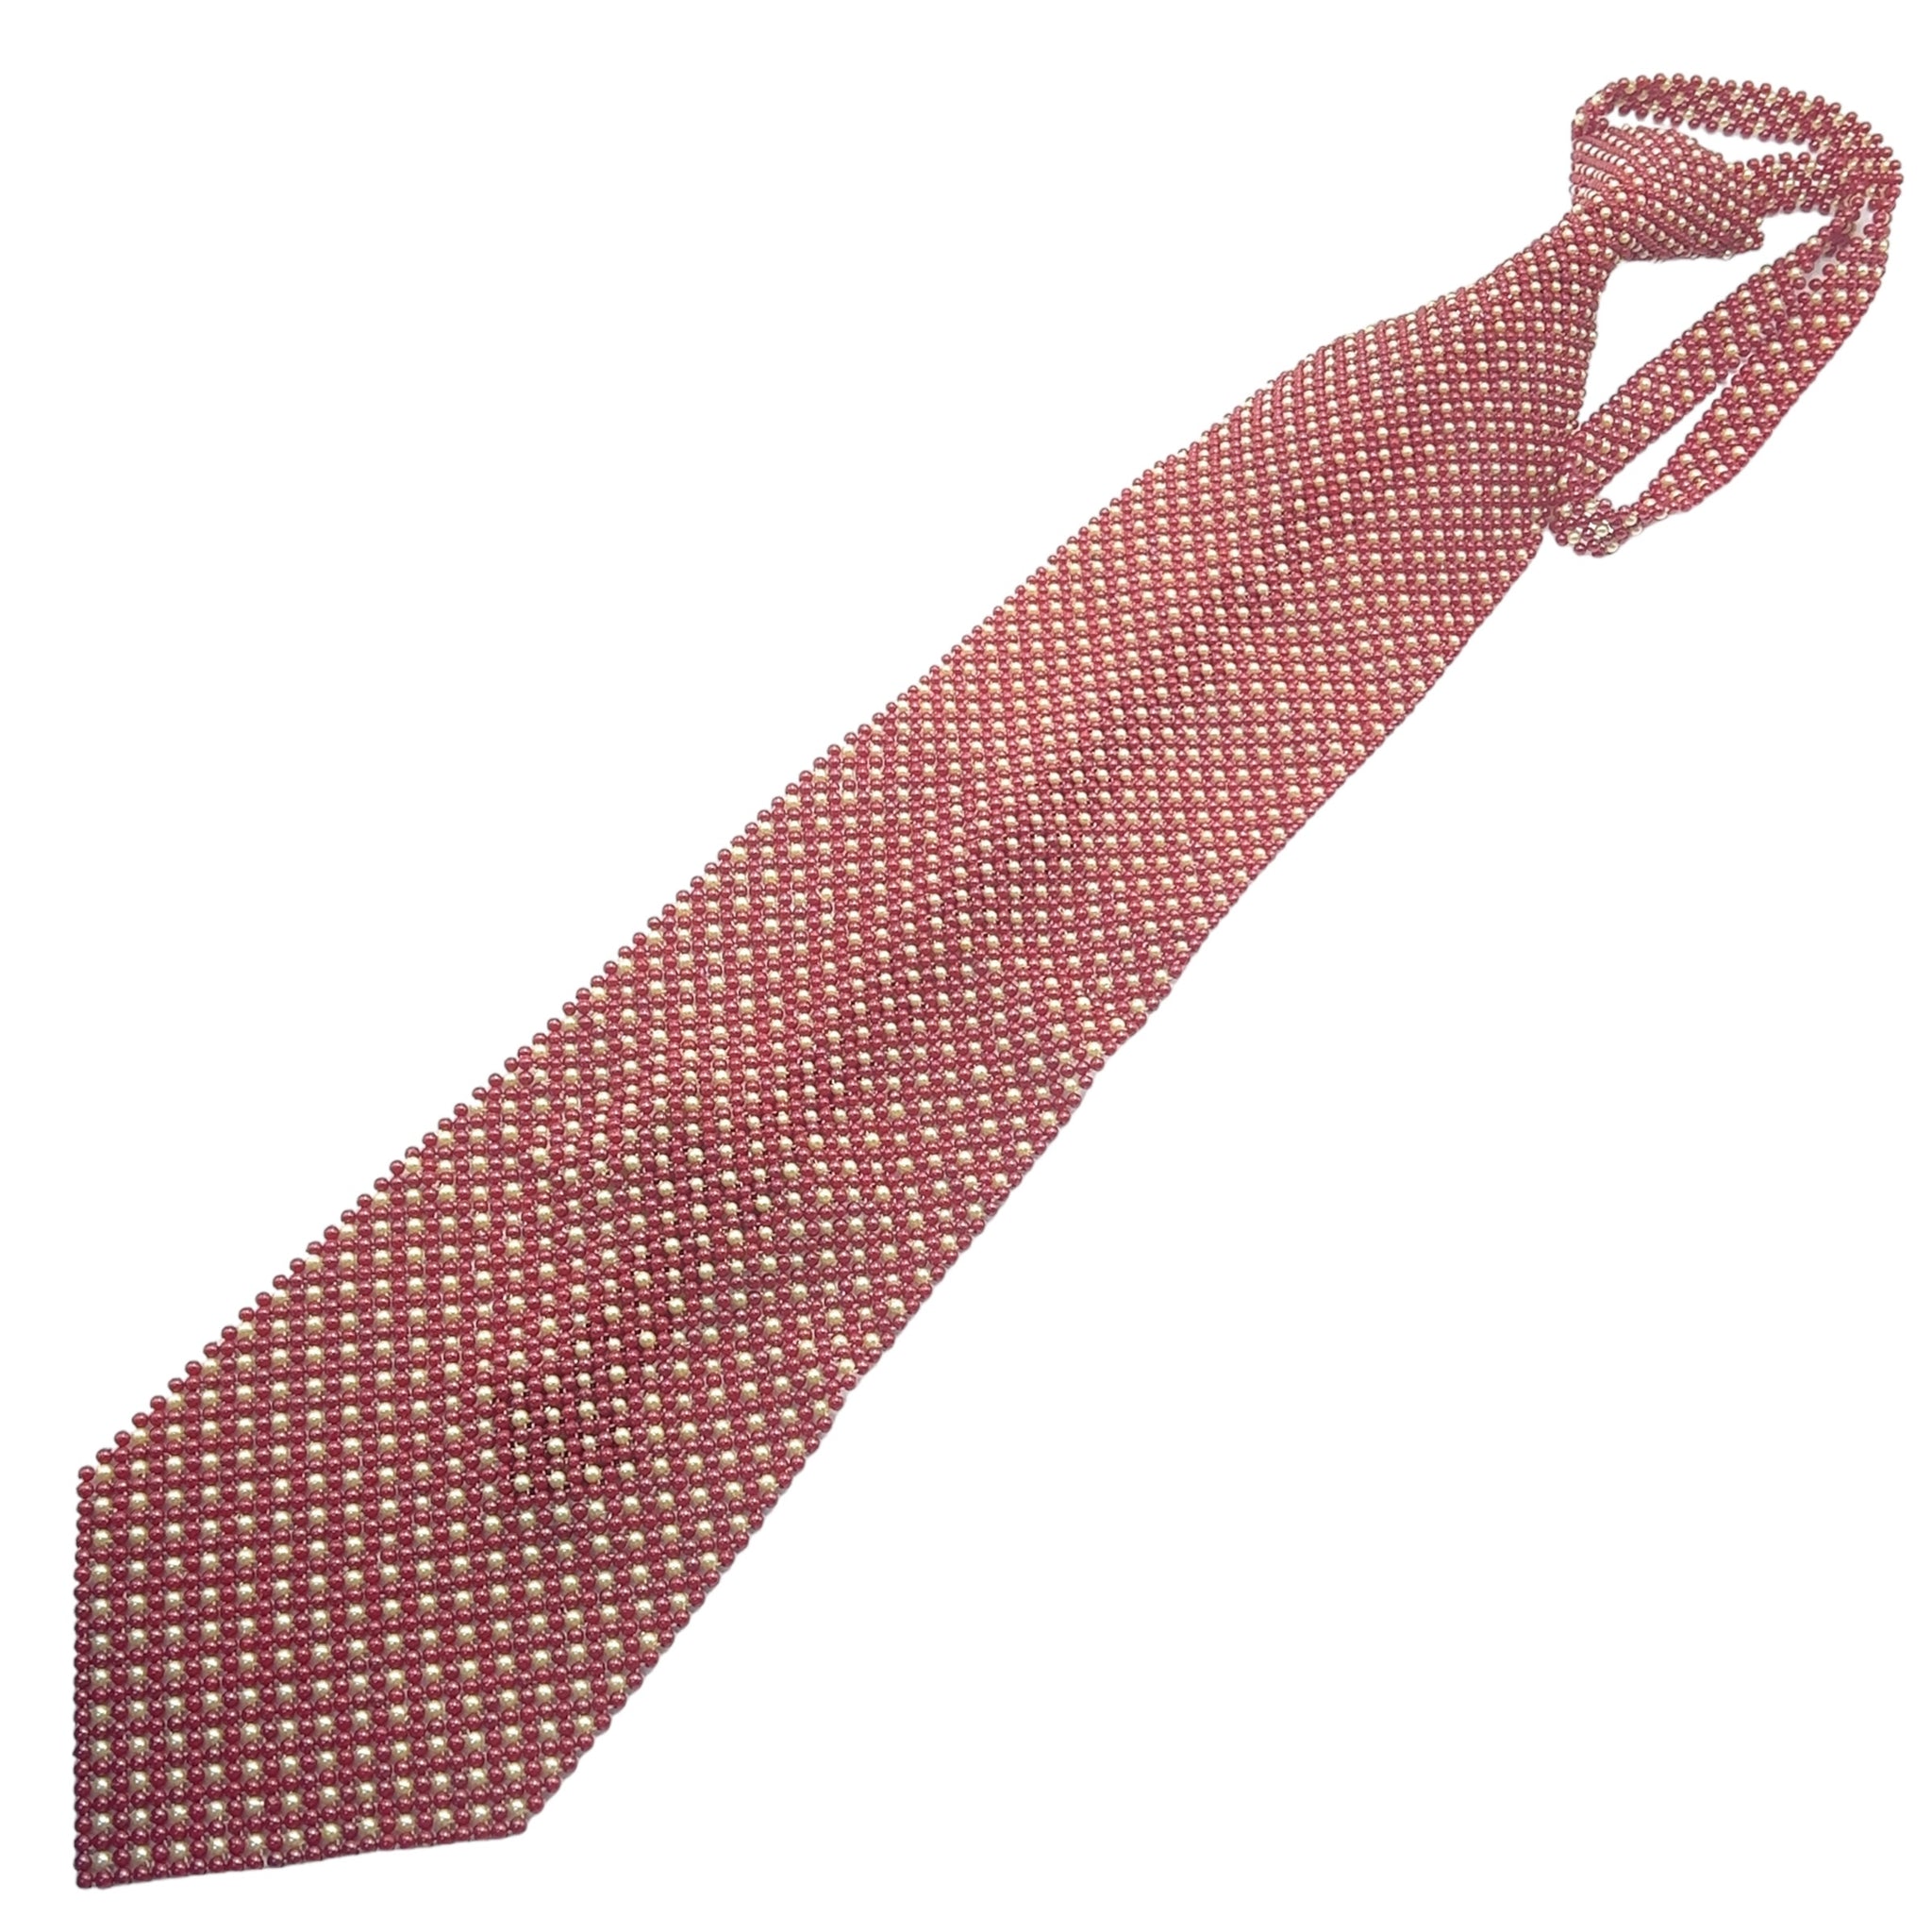 Handcrafted Pearl Tie Subtle and Stylish Necktie